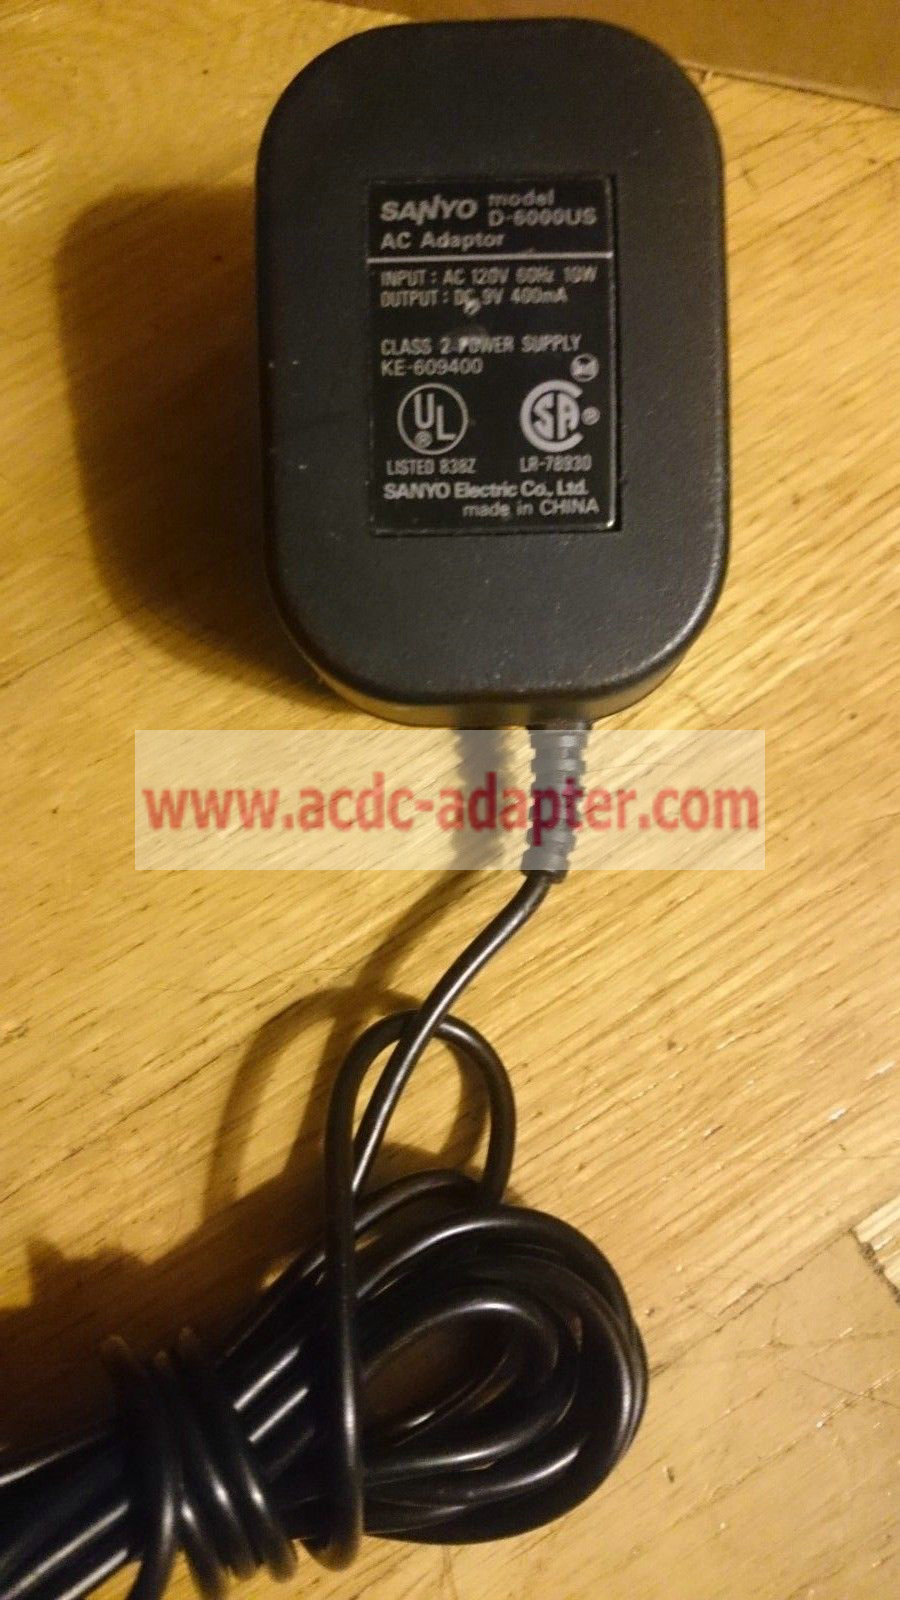 New SANYO D-6000US 9VDC 400mA AC Power Adapter For Sanyo Microcassette Transcriber